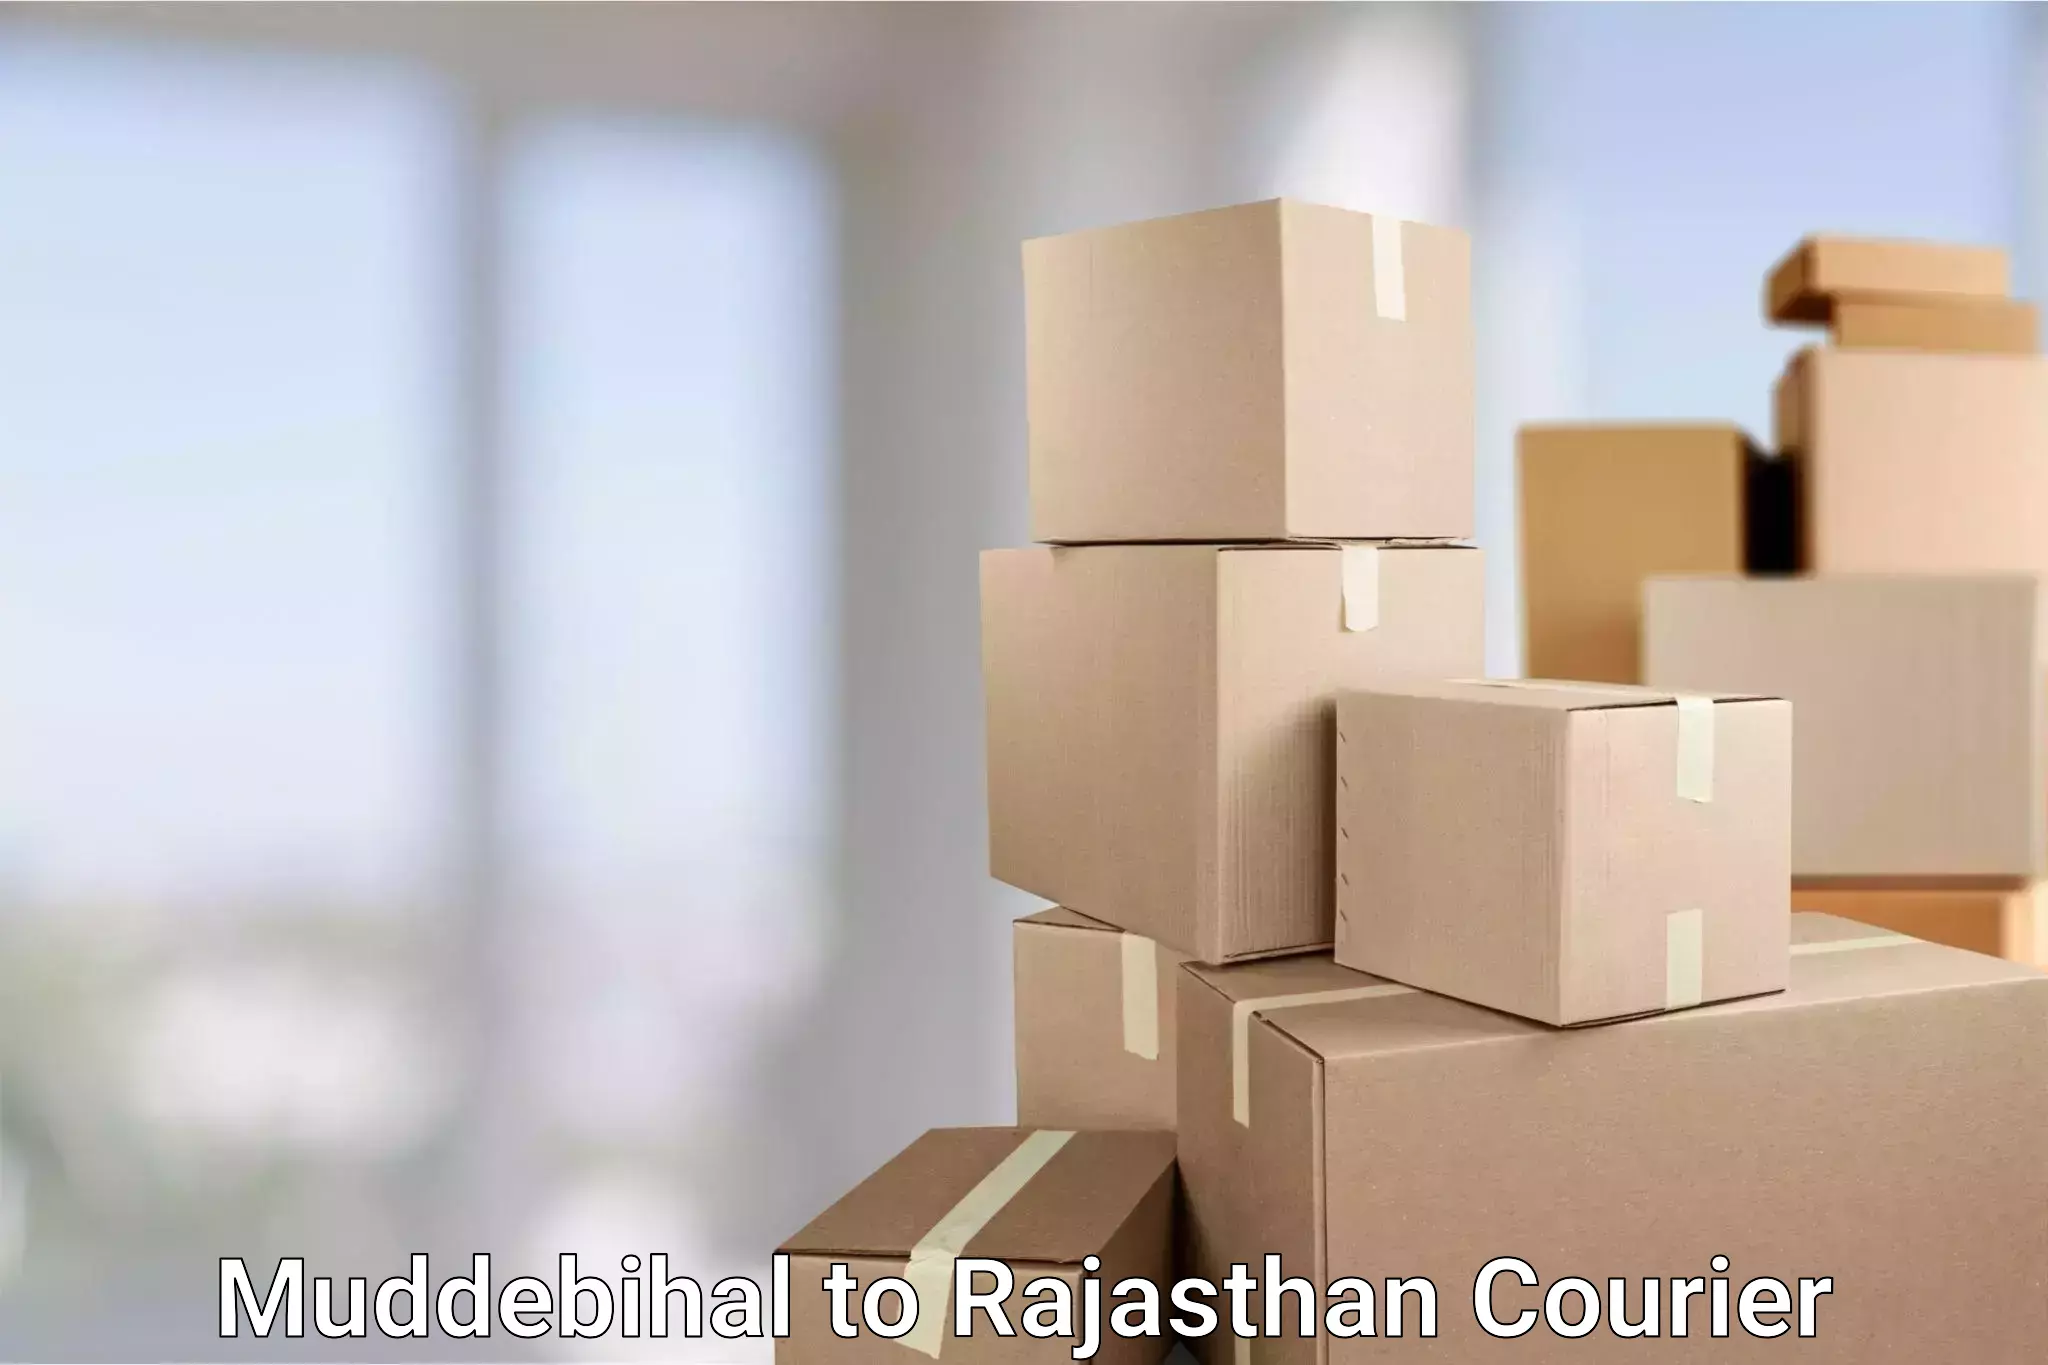 Express delivery solutions Muddebihal to Rajasthan